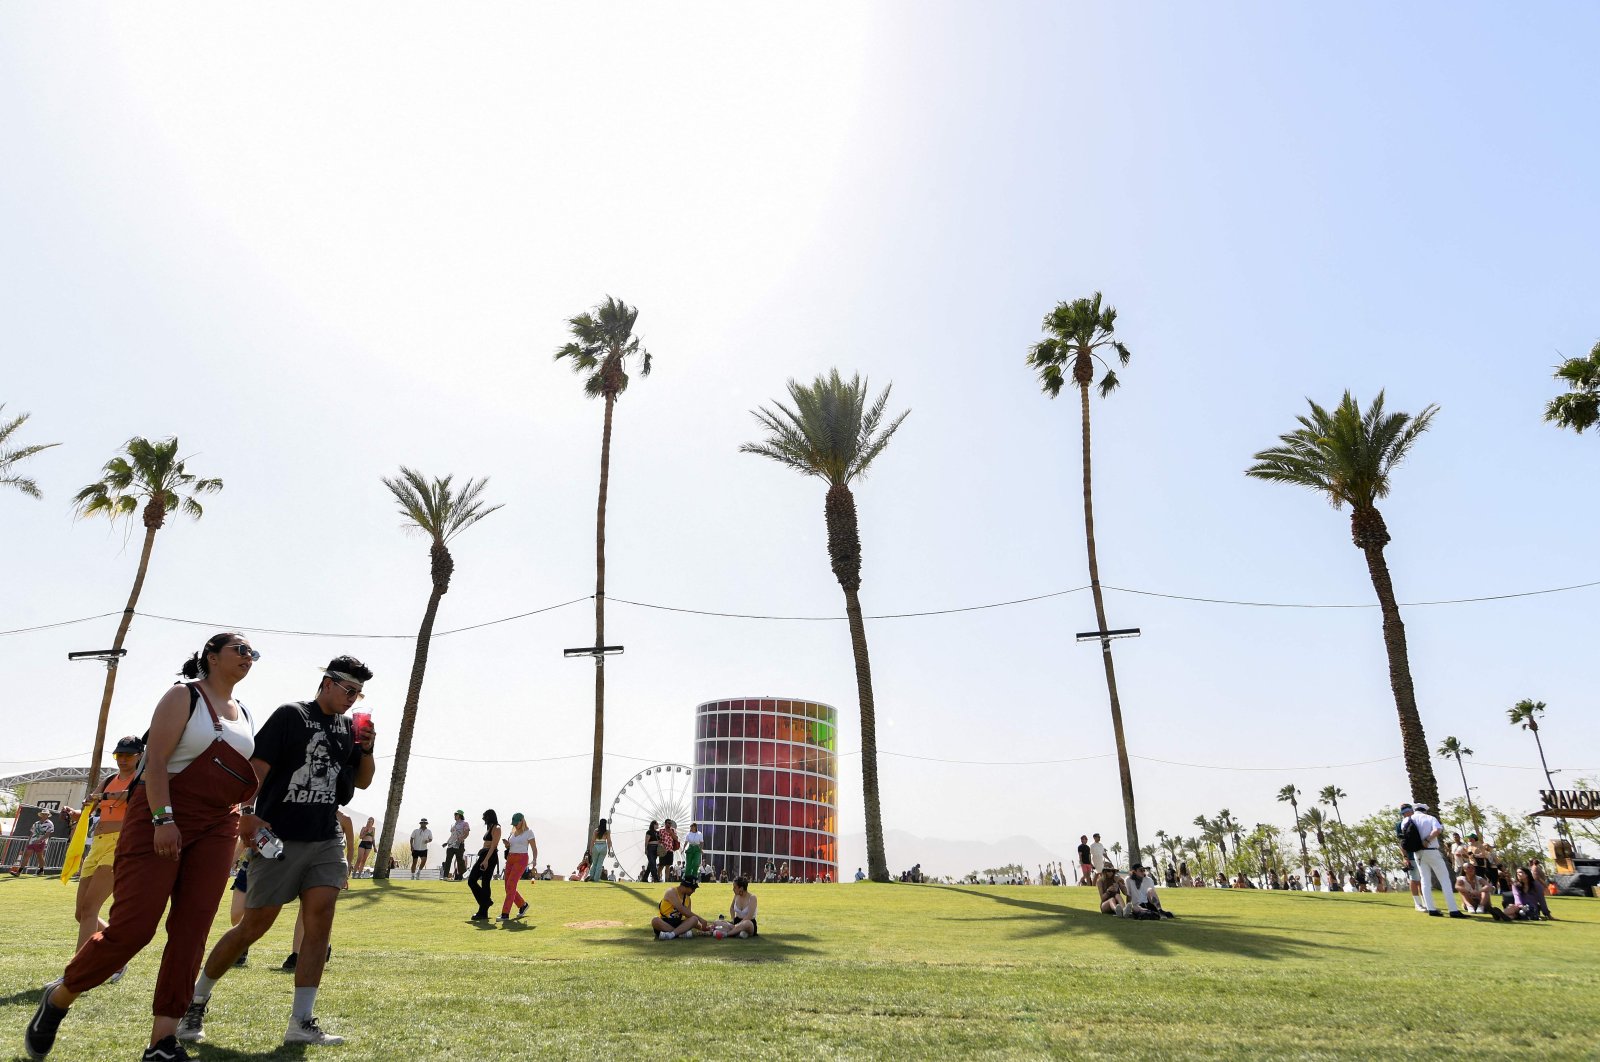 People sit in the shade of palm trees at the Coachella Valley Music and Arts Festival in Indio, California, April 16, 2022. (AFP Photo)